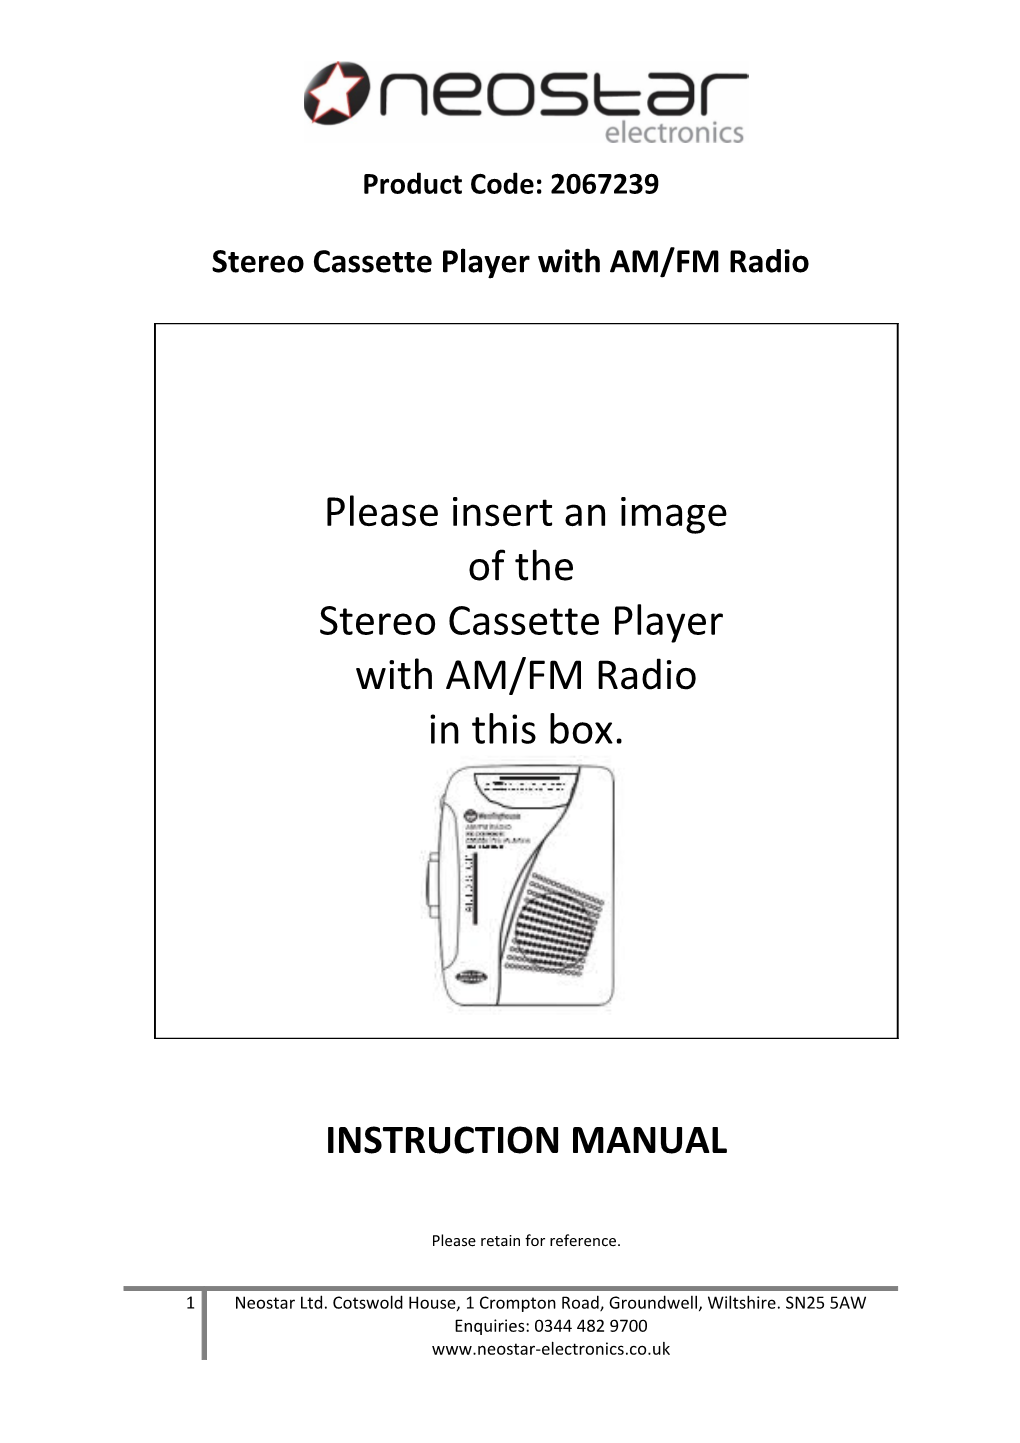 Stereo Cassette Player with AM/FM Radio